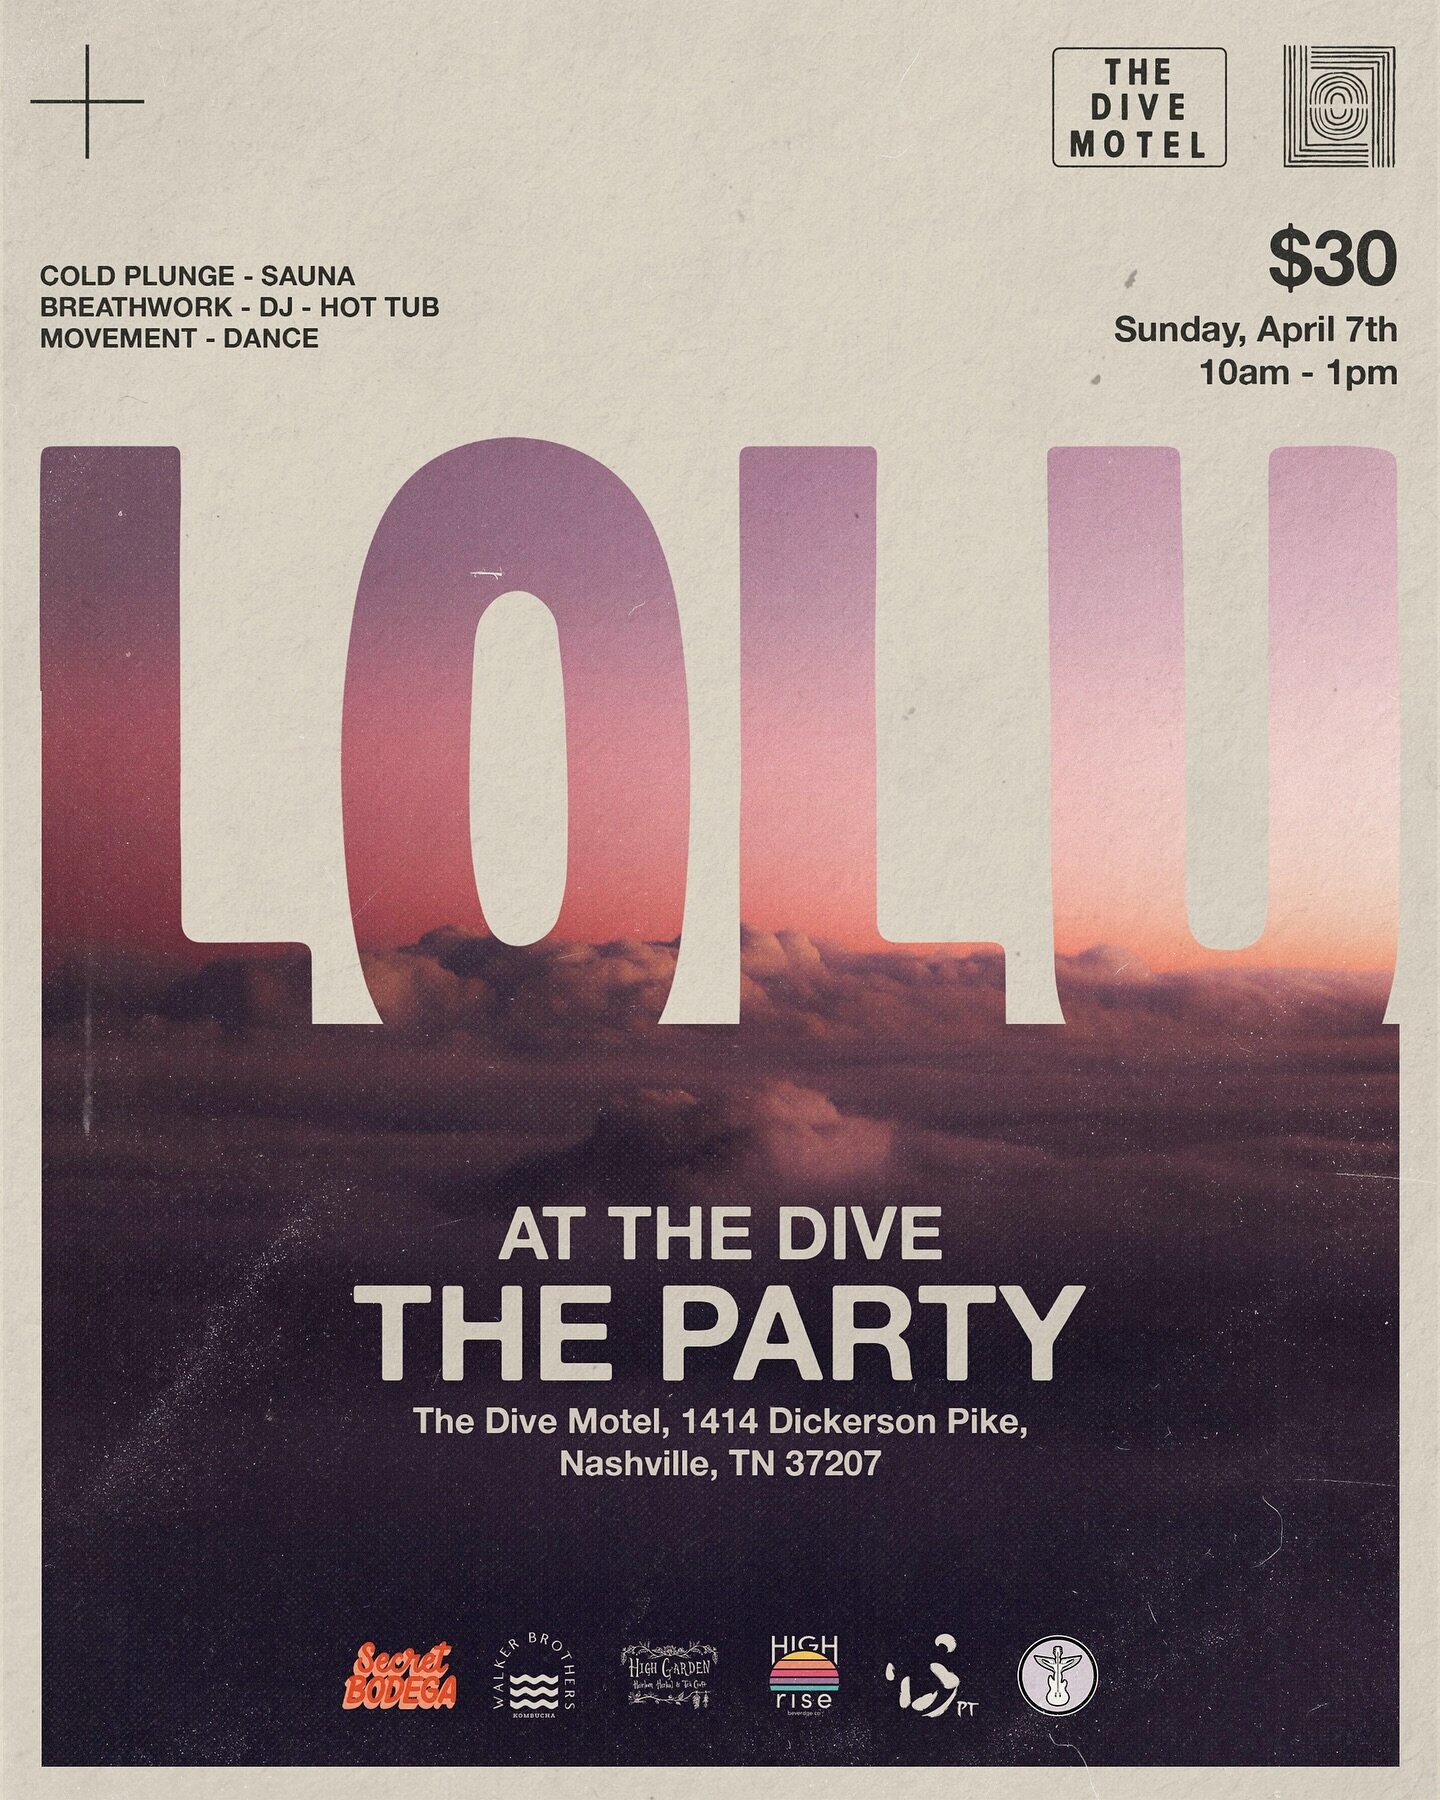 THE PARTY is this Sunday, April 7th at 10am! Come out to Lolu at The Dive and invigorate your mind, body, and spirit. Bring a friend and get a FREE BEANIE! Sign up on Mindbody or at the link in bio 🧊🔥🧊🔥
.
.
.
Poster by @danespearman @sickdesignco